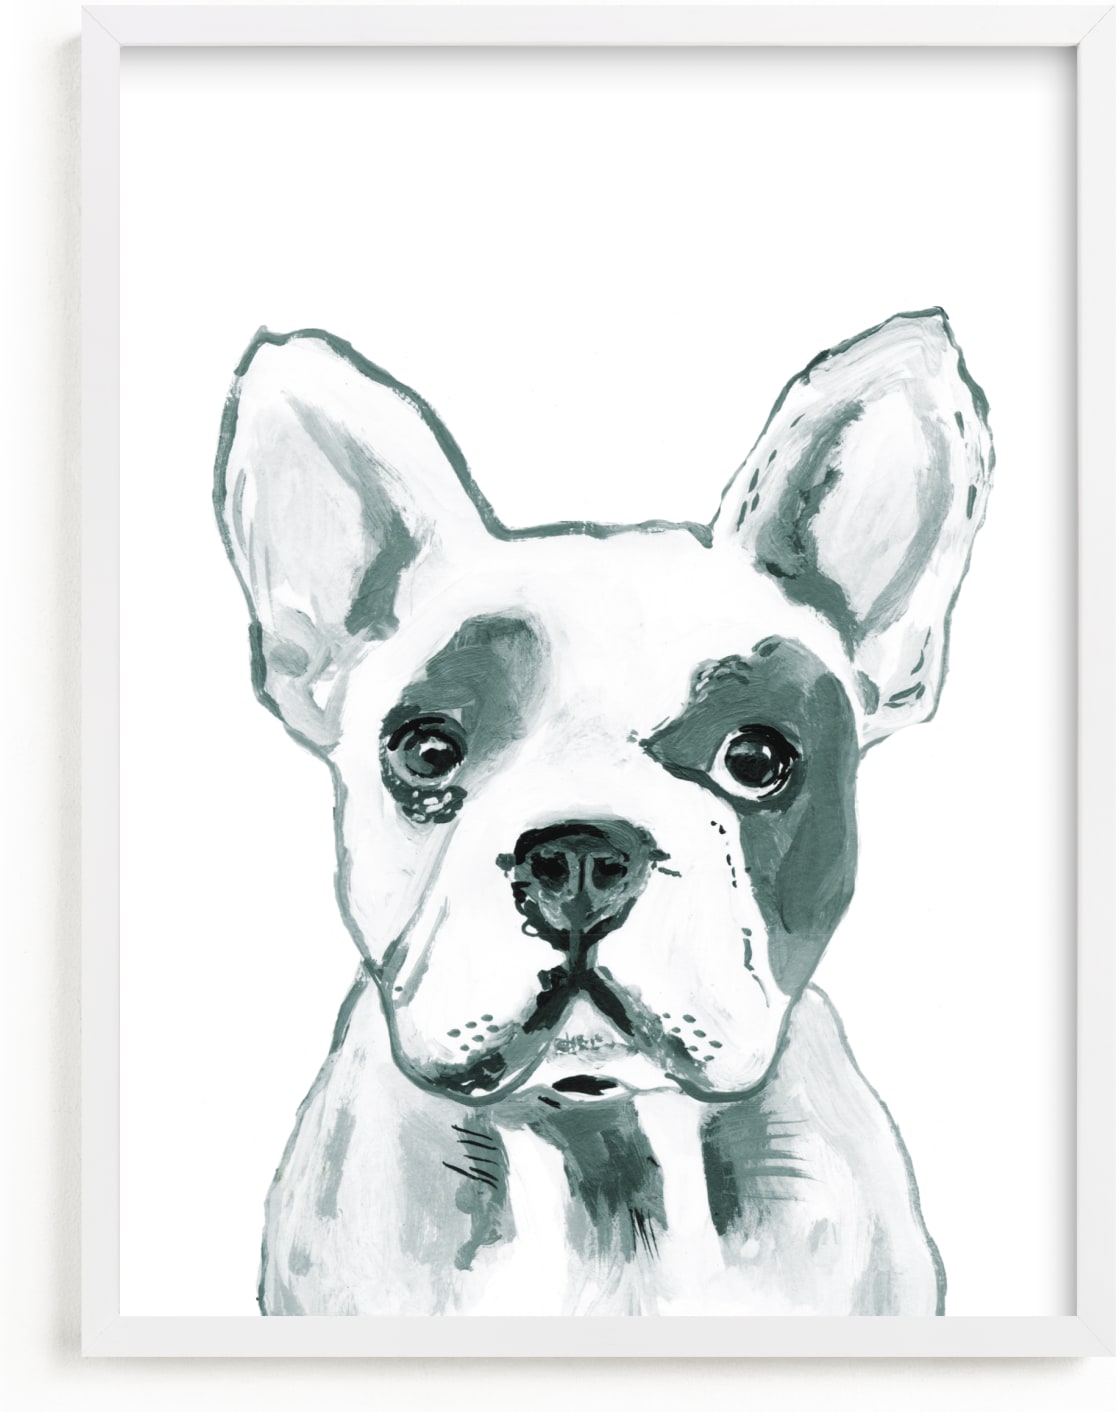 This is a grey art by Makewells called Hey Mr. Dog.